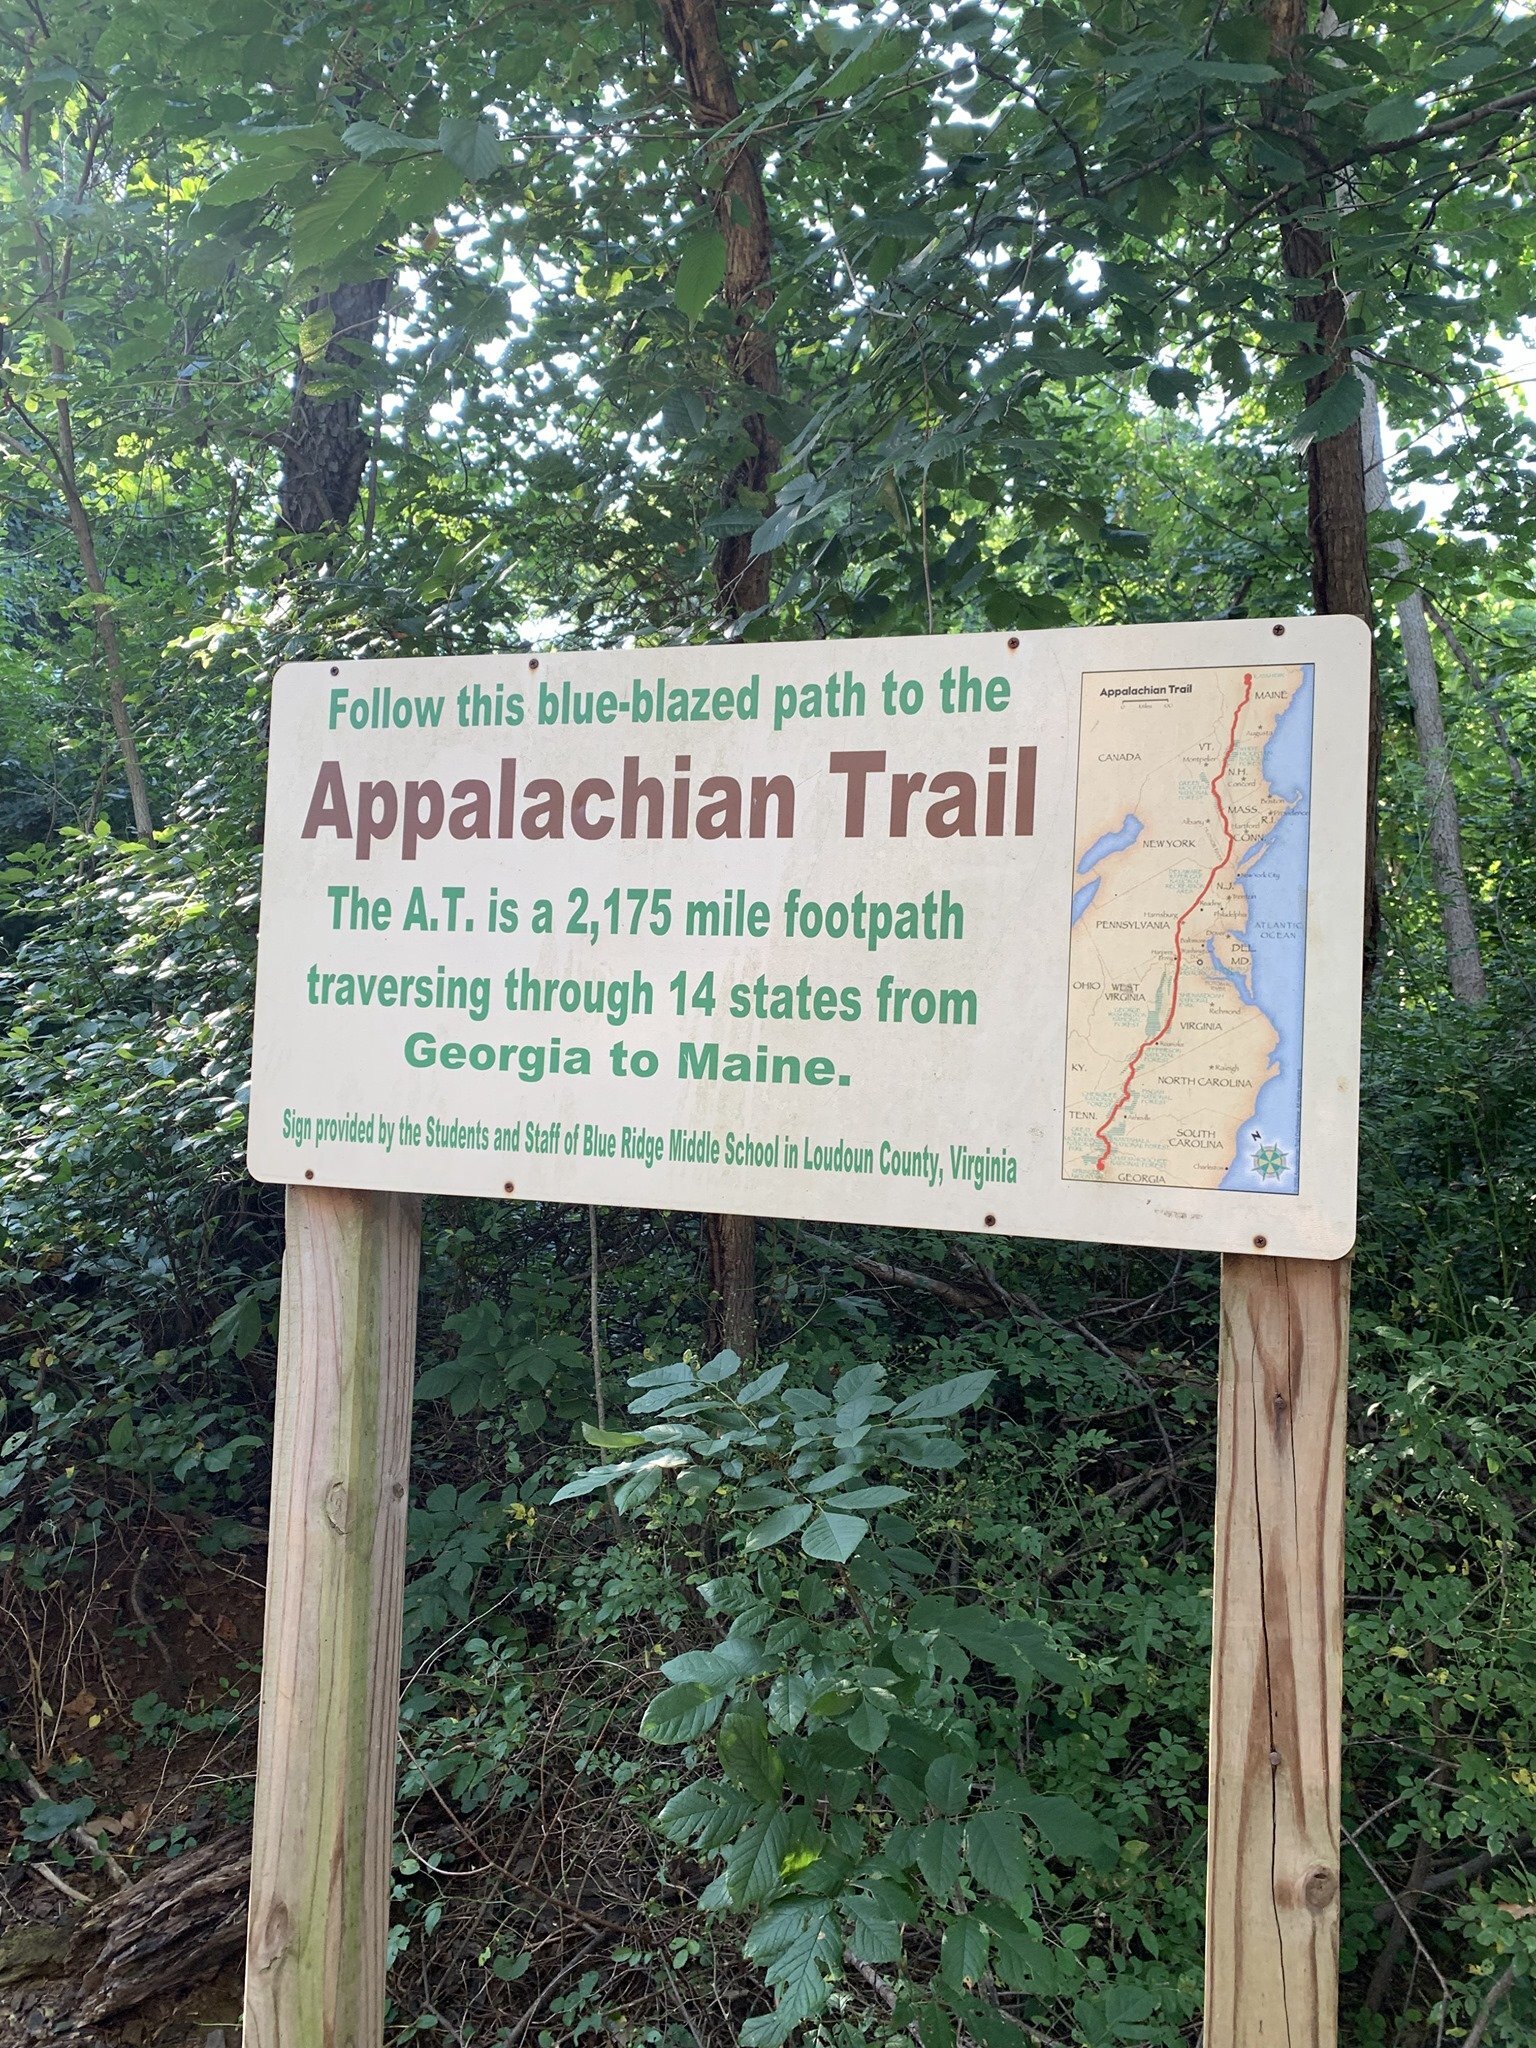 Wendy Zook Photography | Hiking the Appalachian Trail, Appalachian Trail, hiker, outdoor hiking, hiking trail, hiking with friends